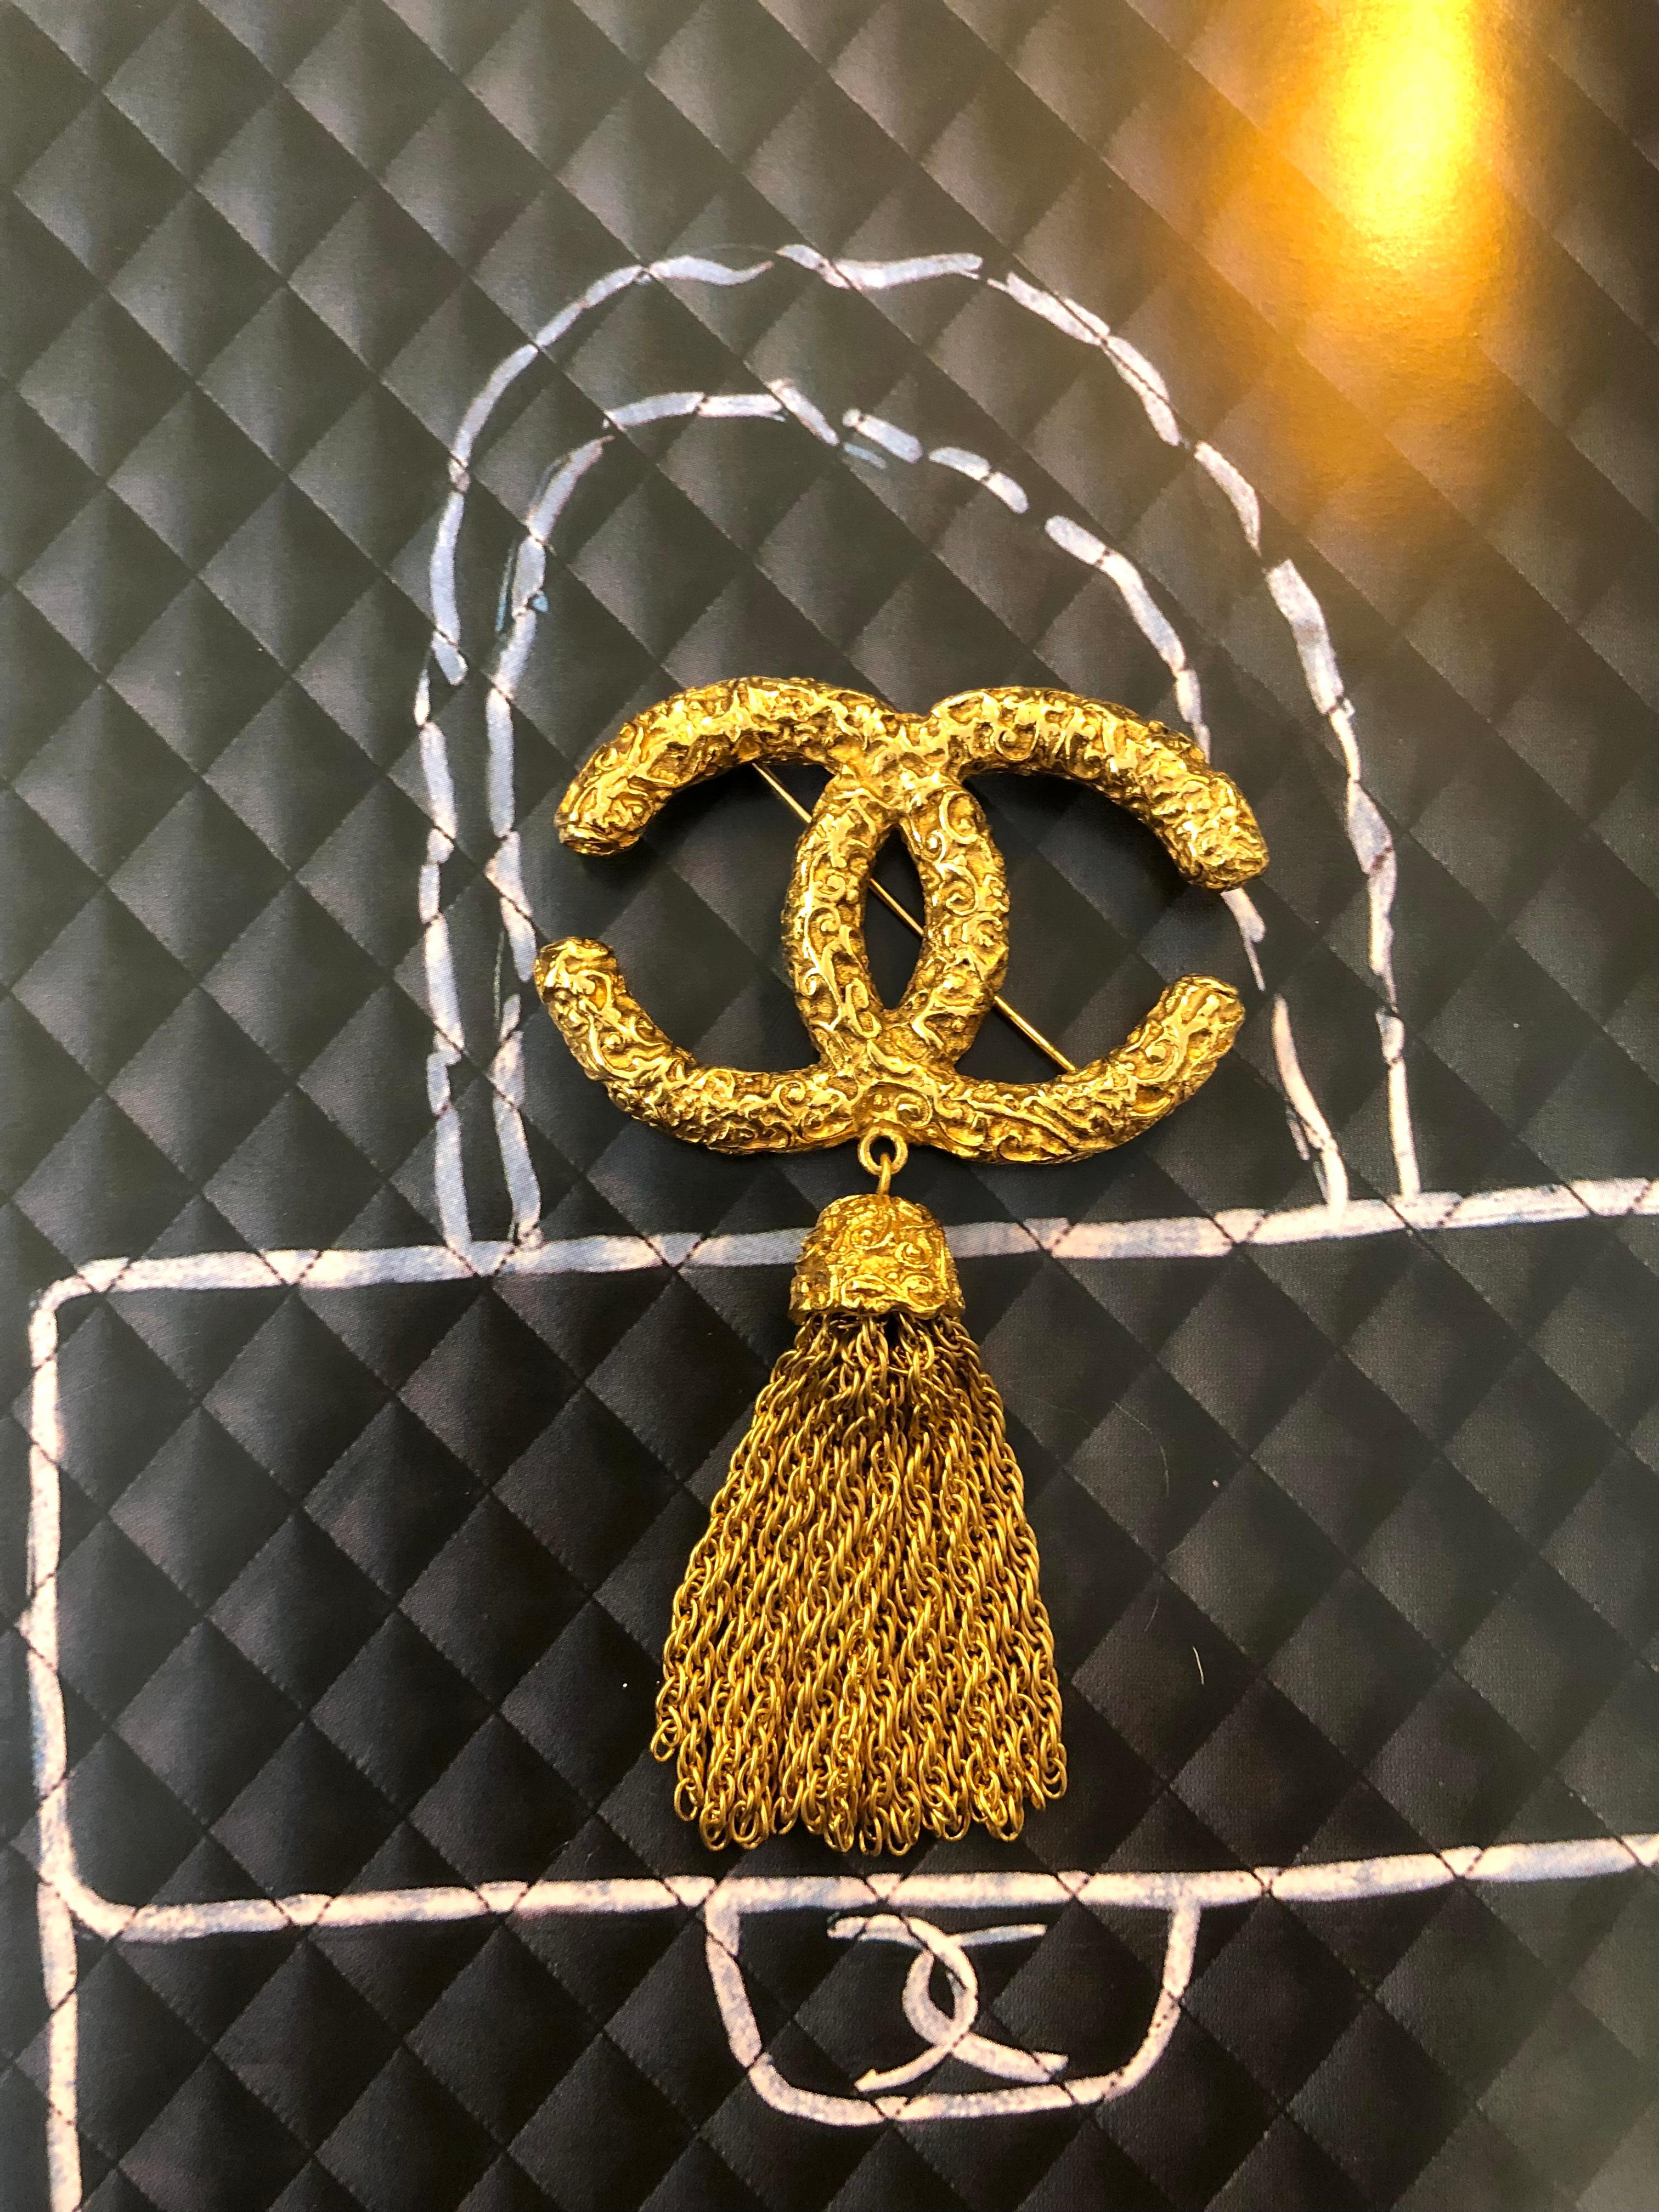 1990s Chanel gold toned brooch featuring a huge CC logo with carved details and a chain tassel.   Stamped 93A made in France. Measures approximately 8.7 x 5.2 cm. Comes with box. 

Condition: Minimal signs of wear. Excellent 